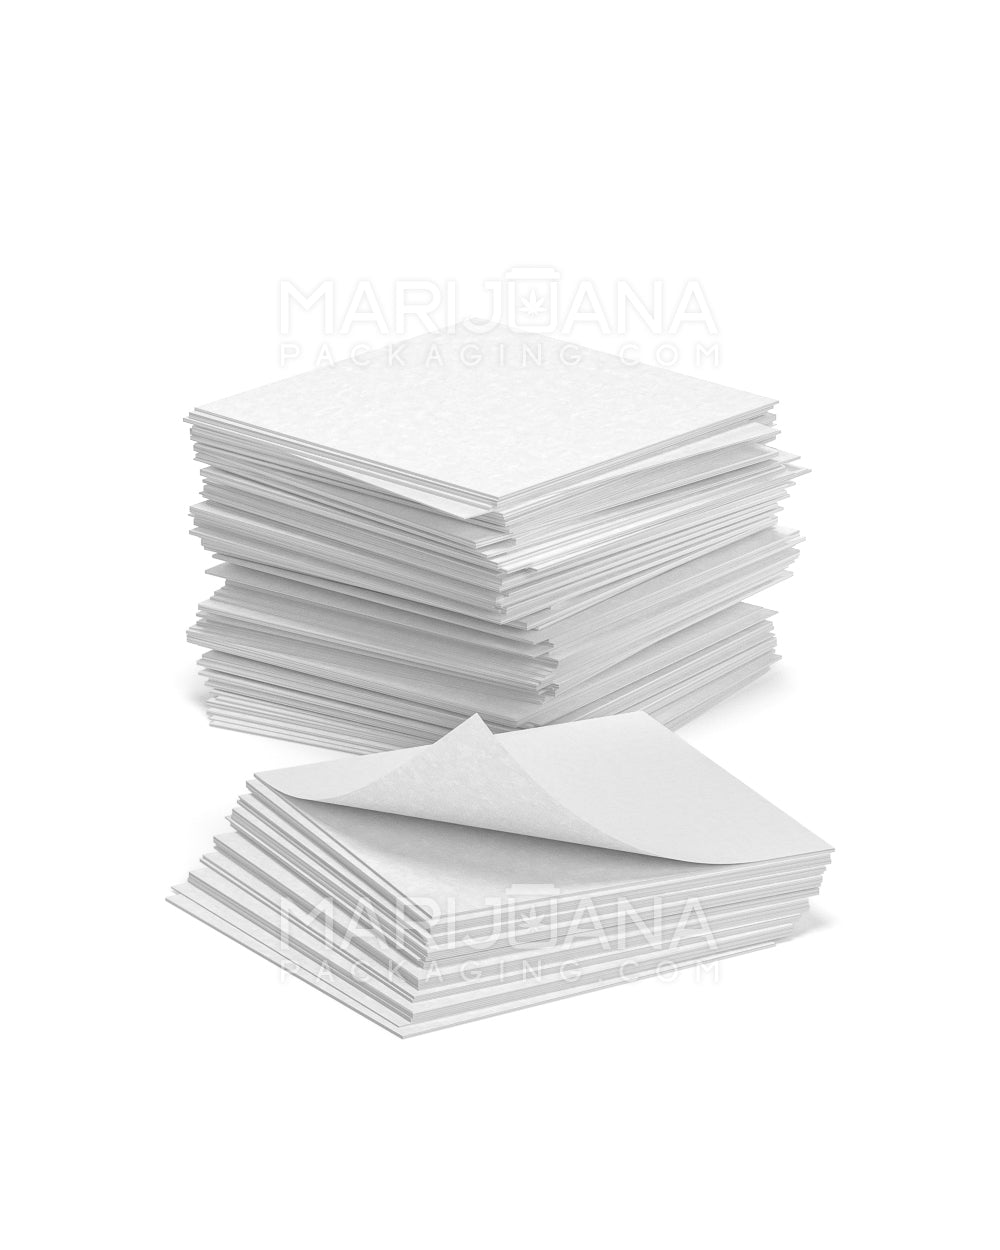 Non Silicone Coated Parchment Paper | 5in x 5in - Bleached White - 1000 Count - 4